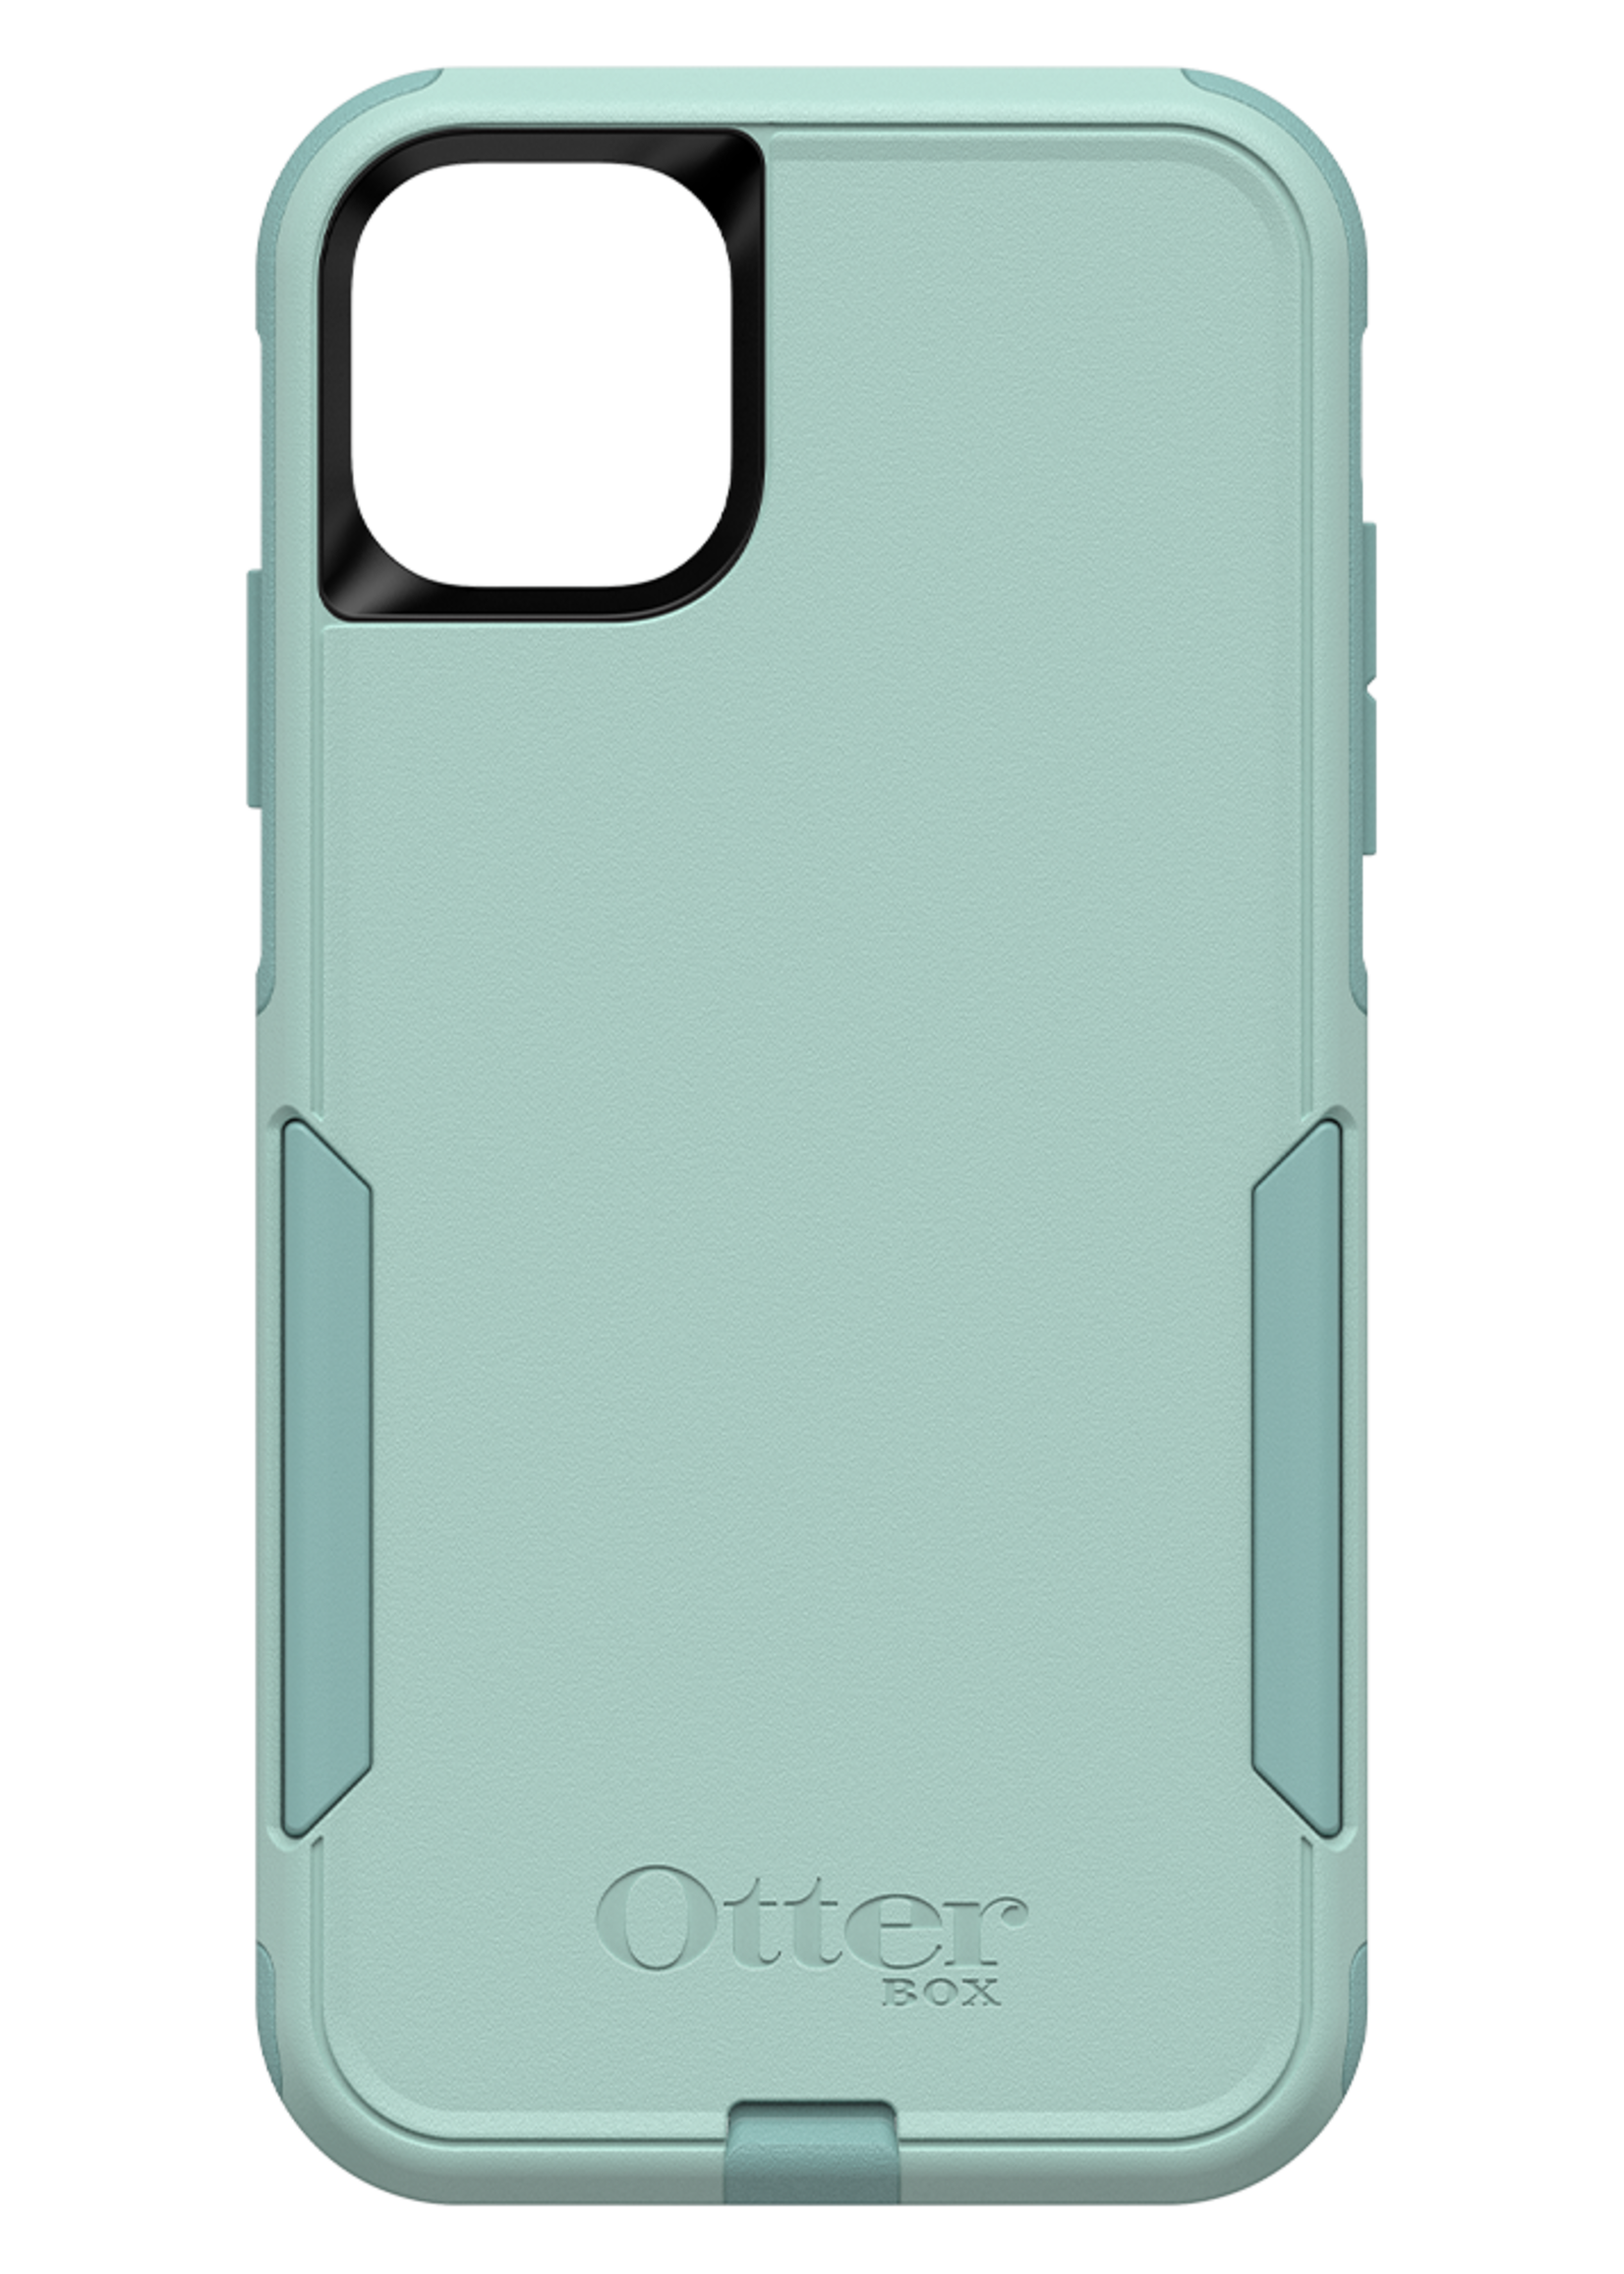 Otterbox OtterBox - Commuter Case for Apple iPhone 11 - Mint Way